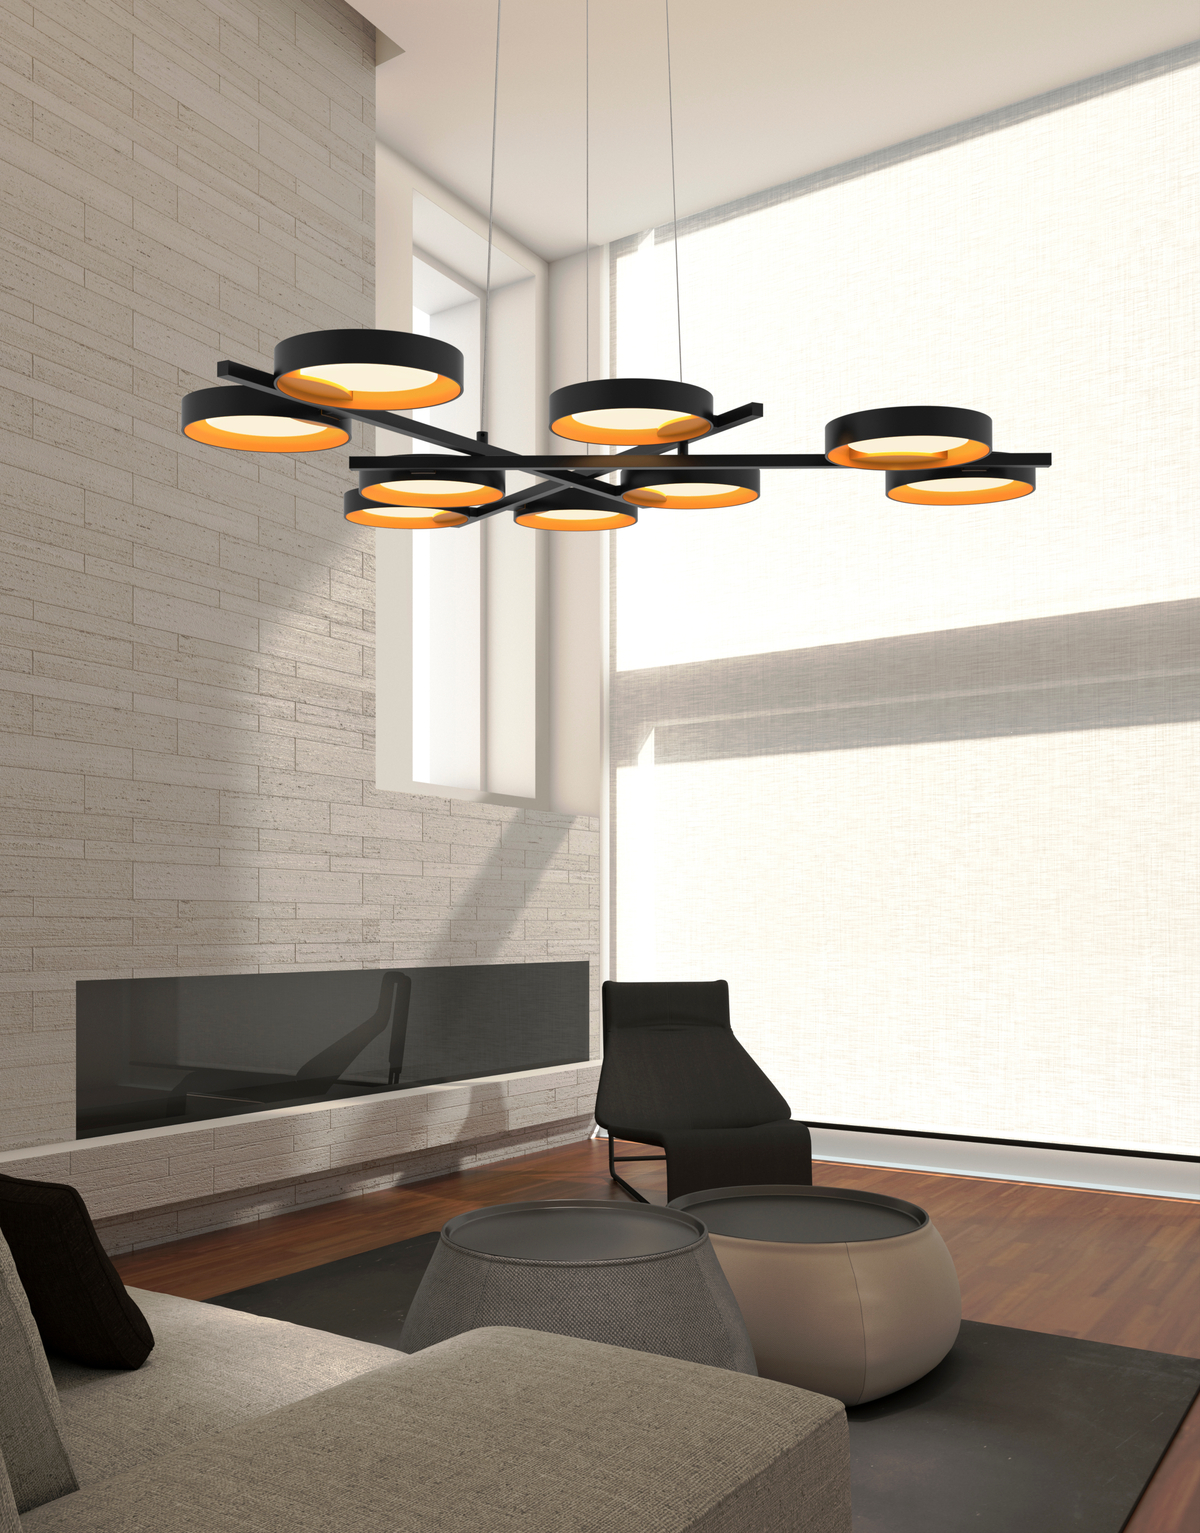 Black fixture with amber colored lighting in modern living room